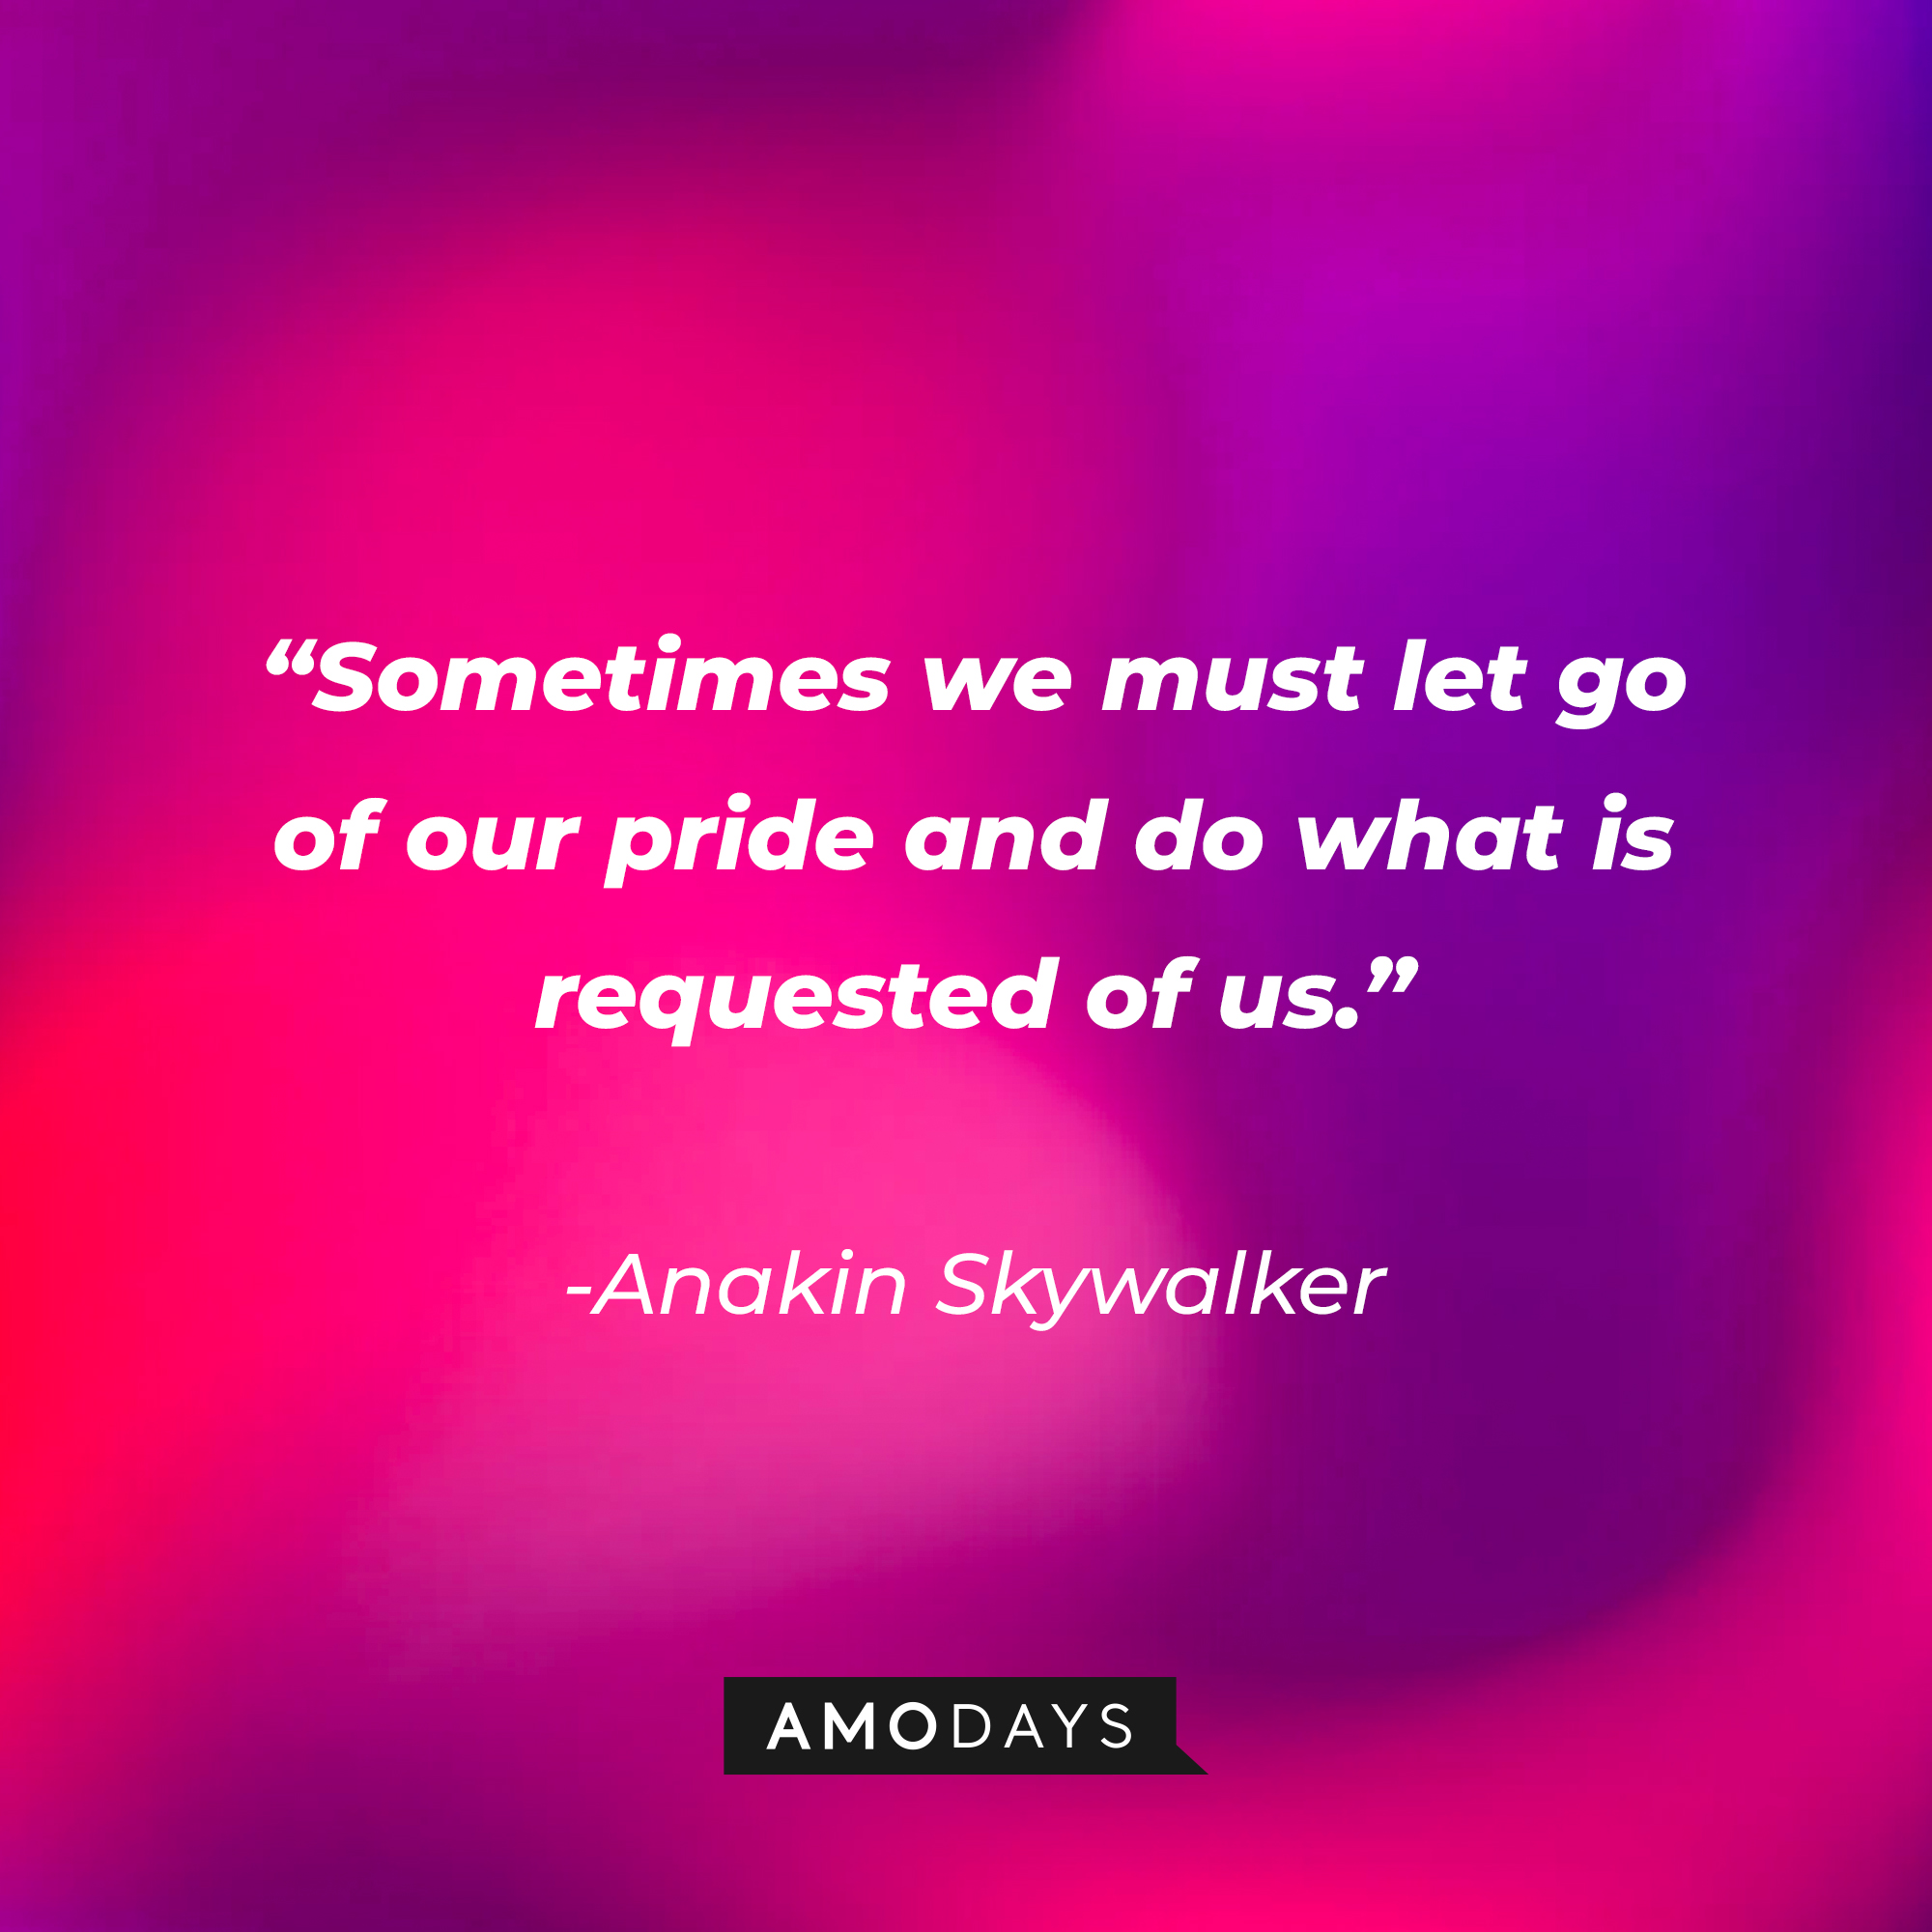 Anakin Skywalker’s quote: "Sometimes we must let go of our pride and do what is requested of us." | Source: AmoDays